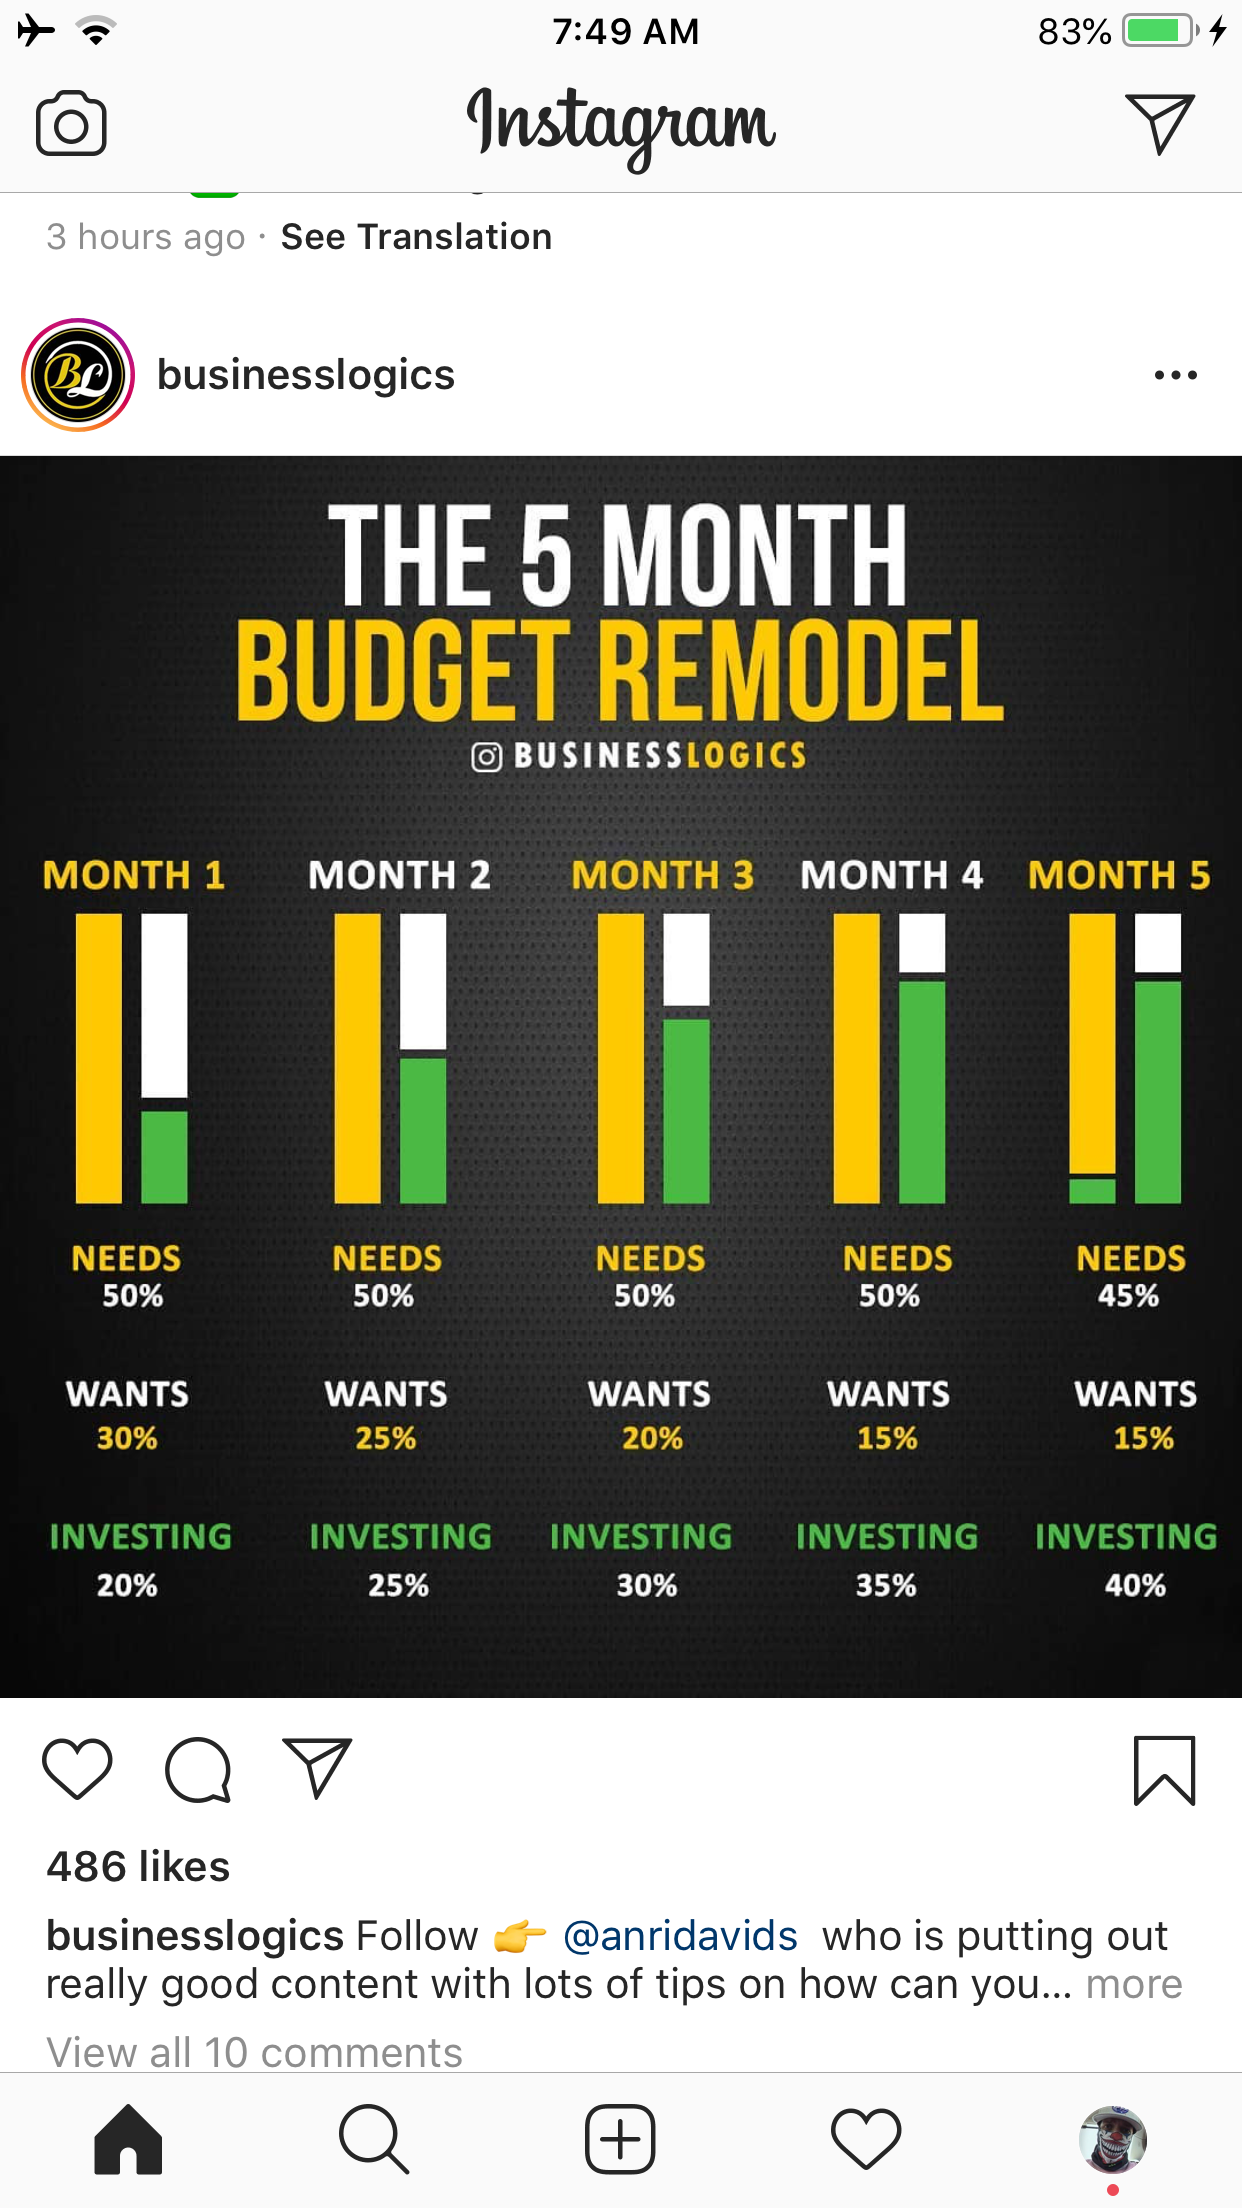 all of the lights remix - 83% Instagram v a hours ago See Translation businesslogics ... The 5 Month Budget Remodel Gbusinesslogics Month 1 Month 2 Month 3 Month 4 Months Needs Son Needs 50% Needs Son Needs 50% Needs 45% Wants 30% Wants 25% Wants 20% Want